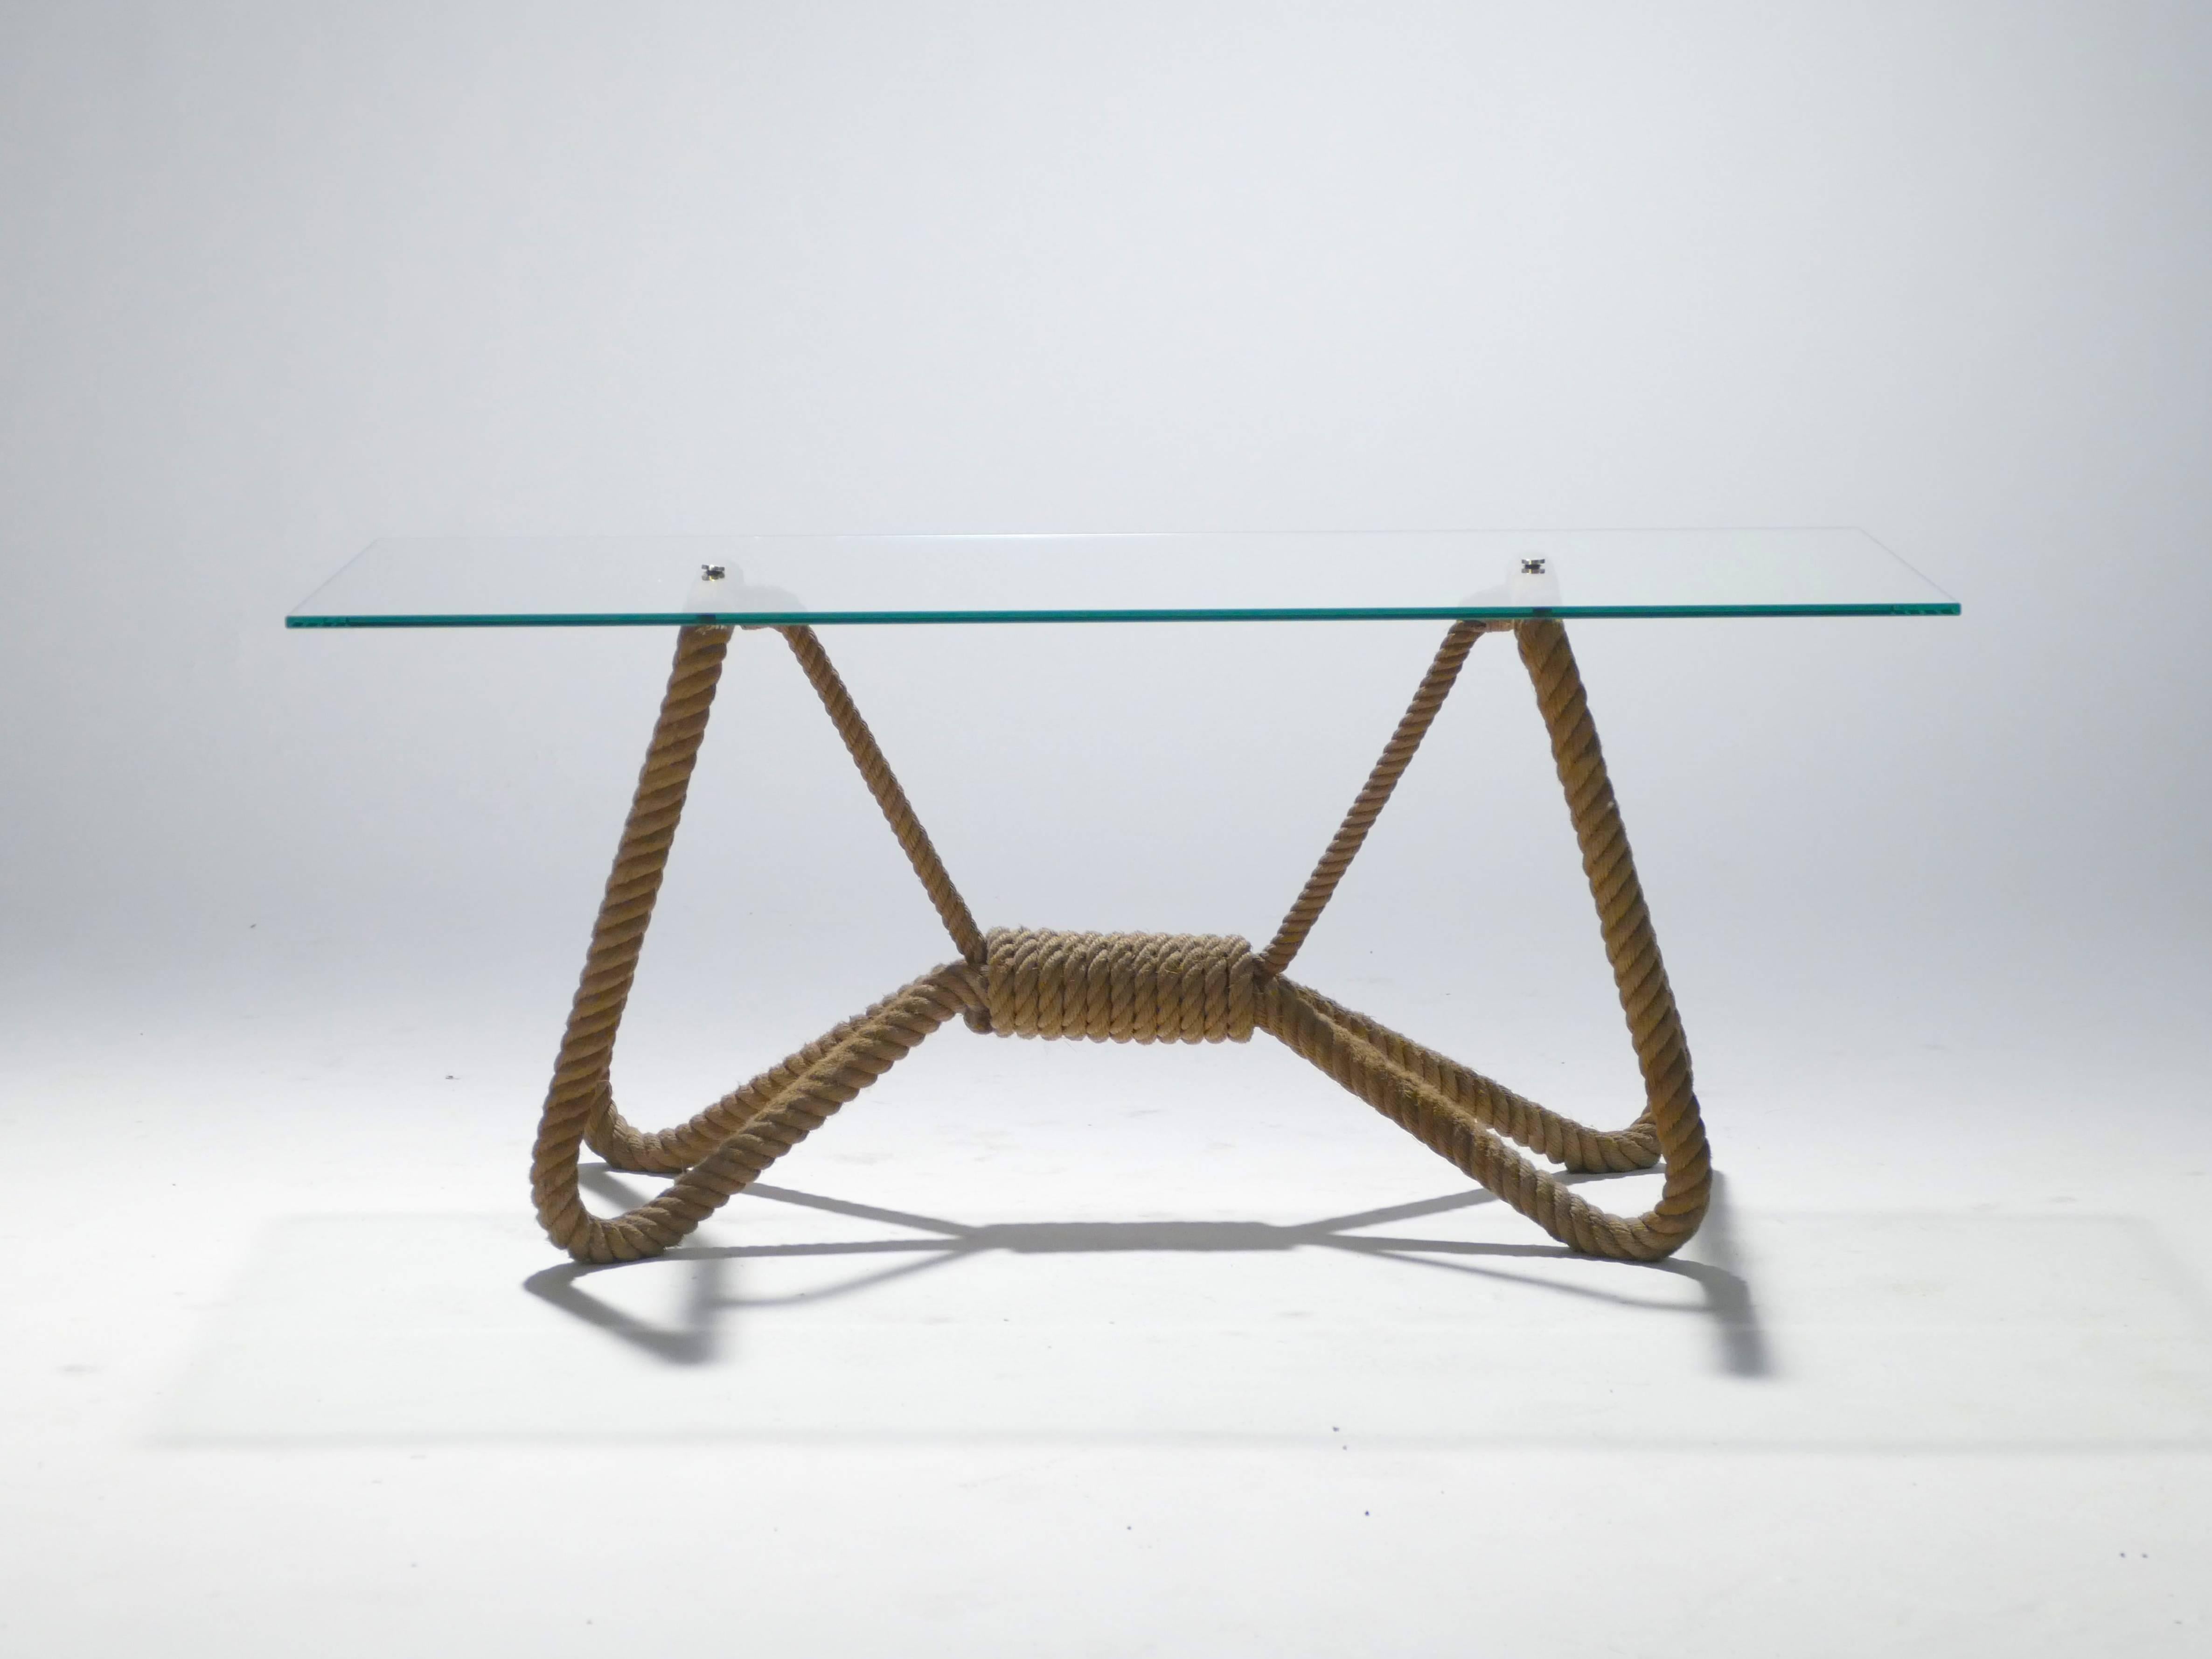 Ocean-inspired rope work, typical of Adrien Audoux and Frida Minet, forms the sturdy feet of the 1960s coffee table. Intriguingly knotted, the ropes are designed to look like a bow. The transparent glass top allows a view of the ropework’s striking